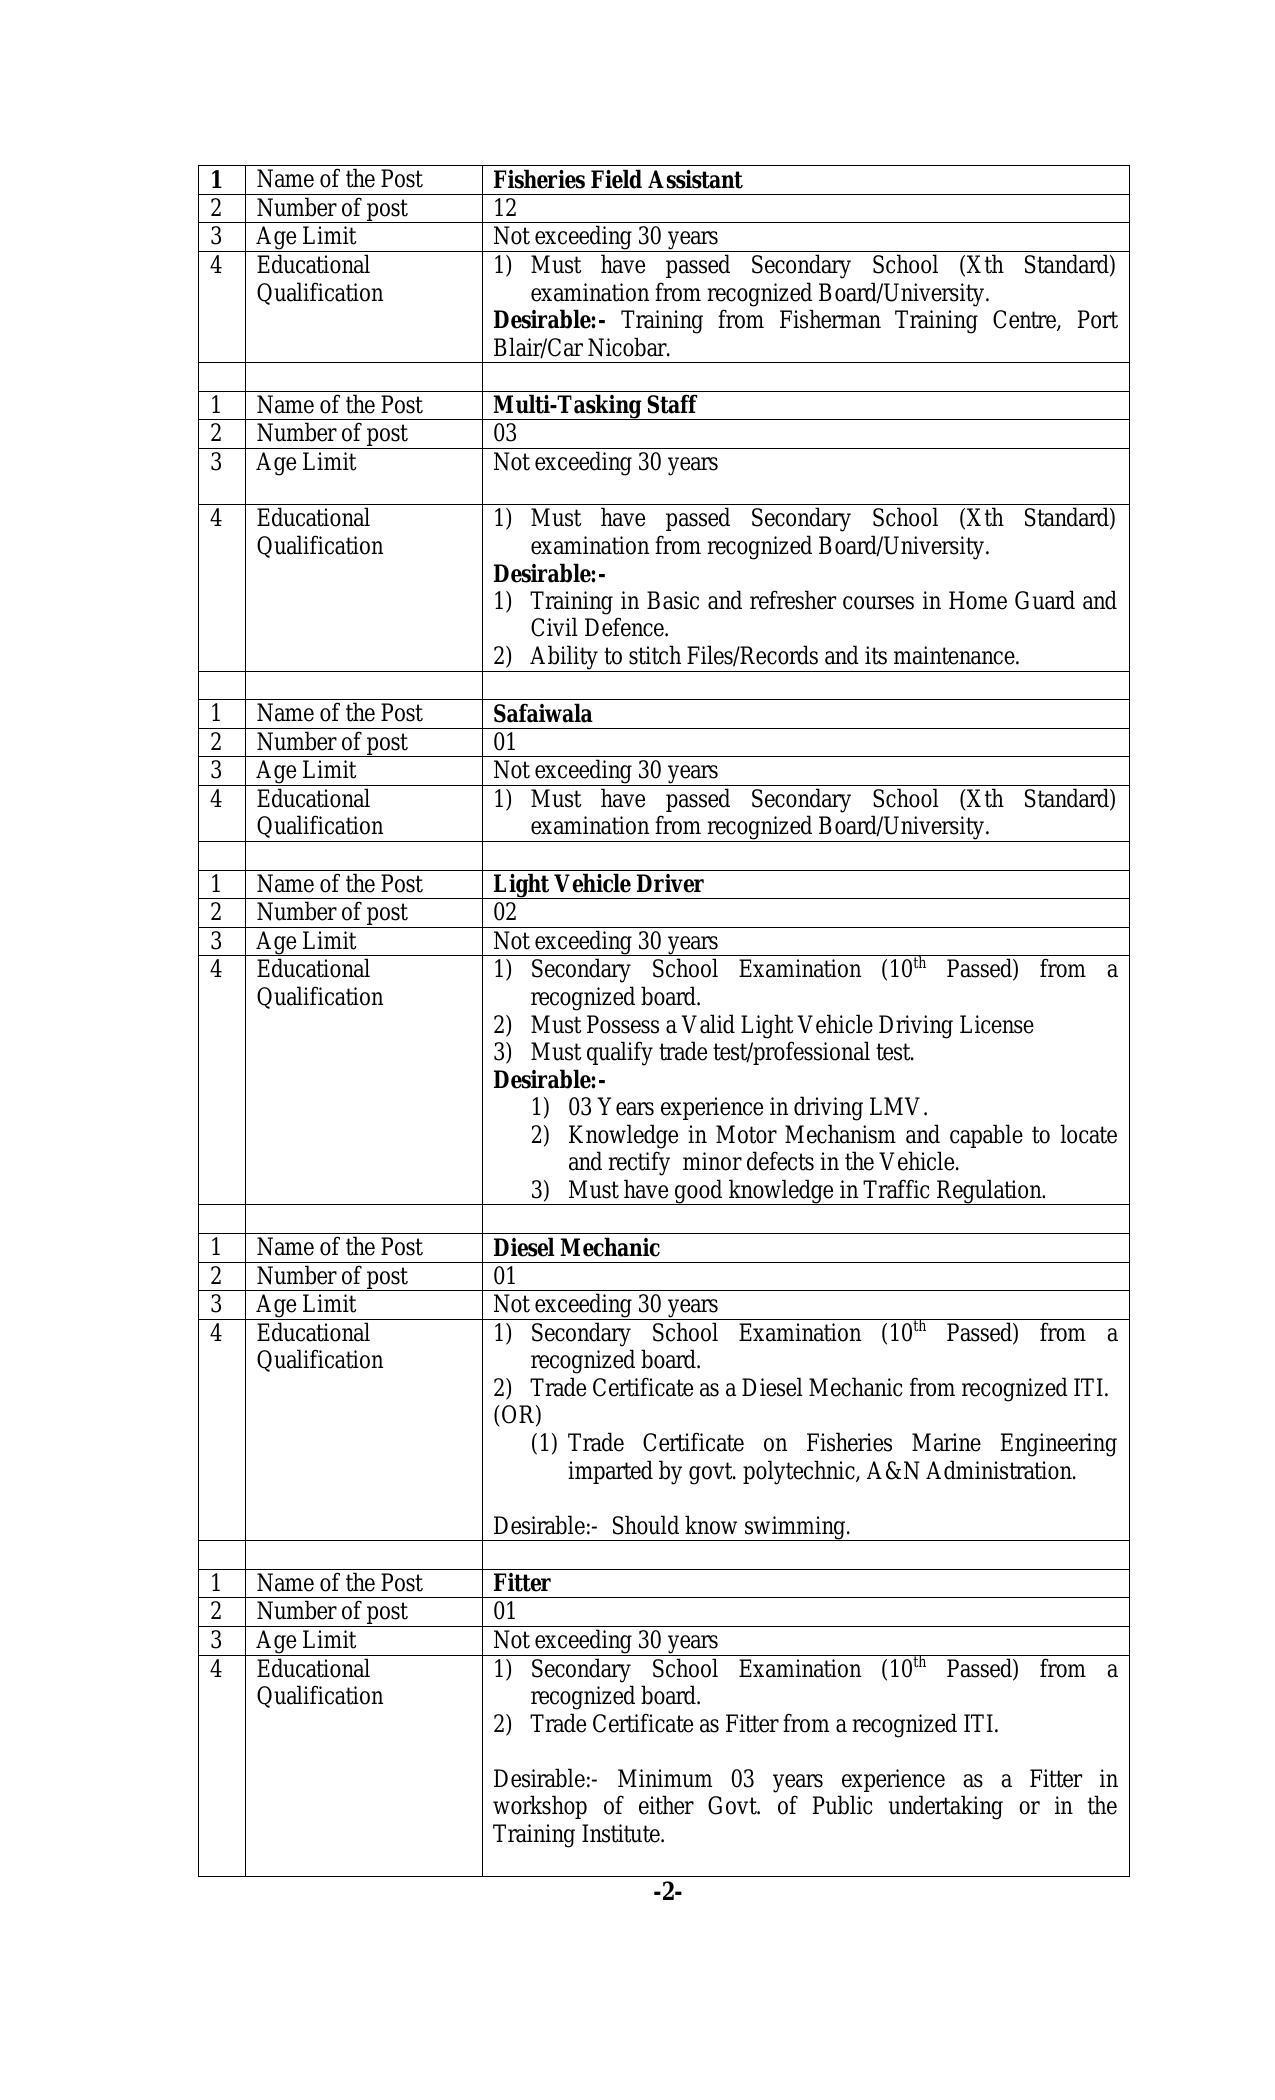 Andaman & Nicobar Administration Invites Application for 26 Fisheries Field Assistant, Light Vehicle Driver, More Vacancies Recruitment 2022 - Page 1